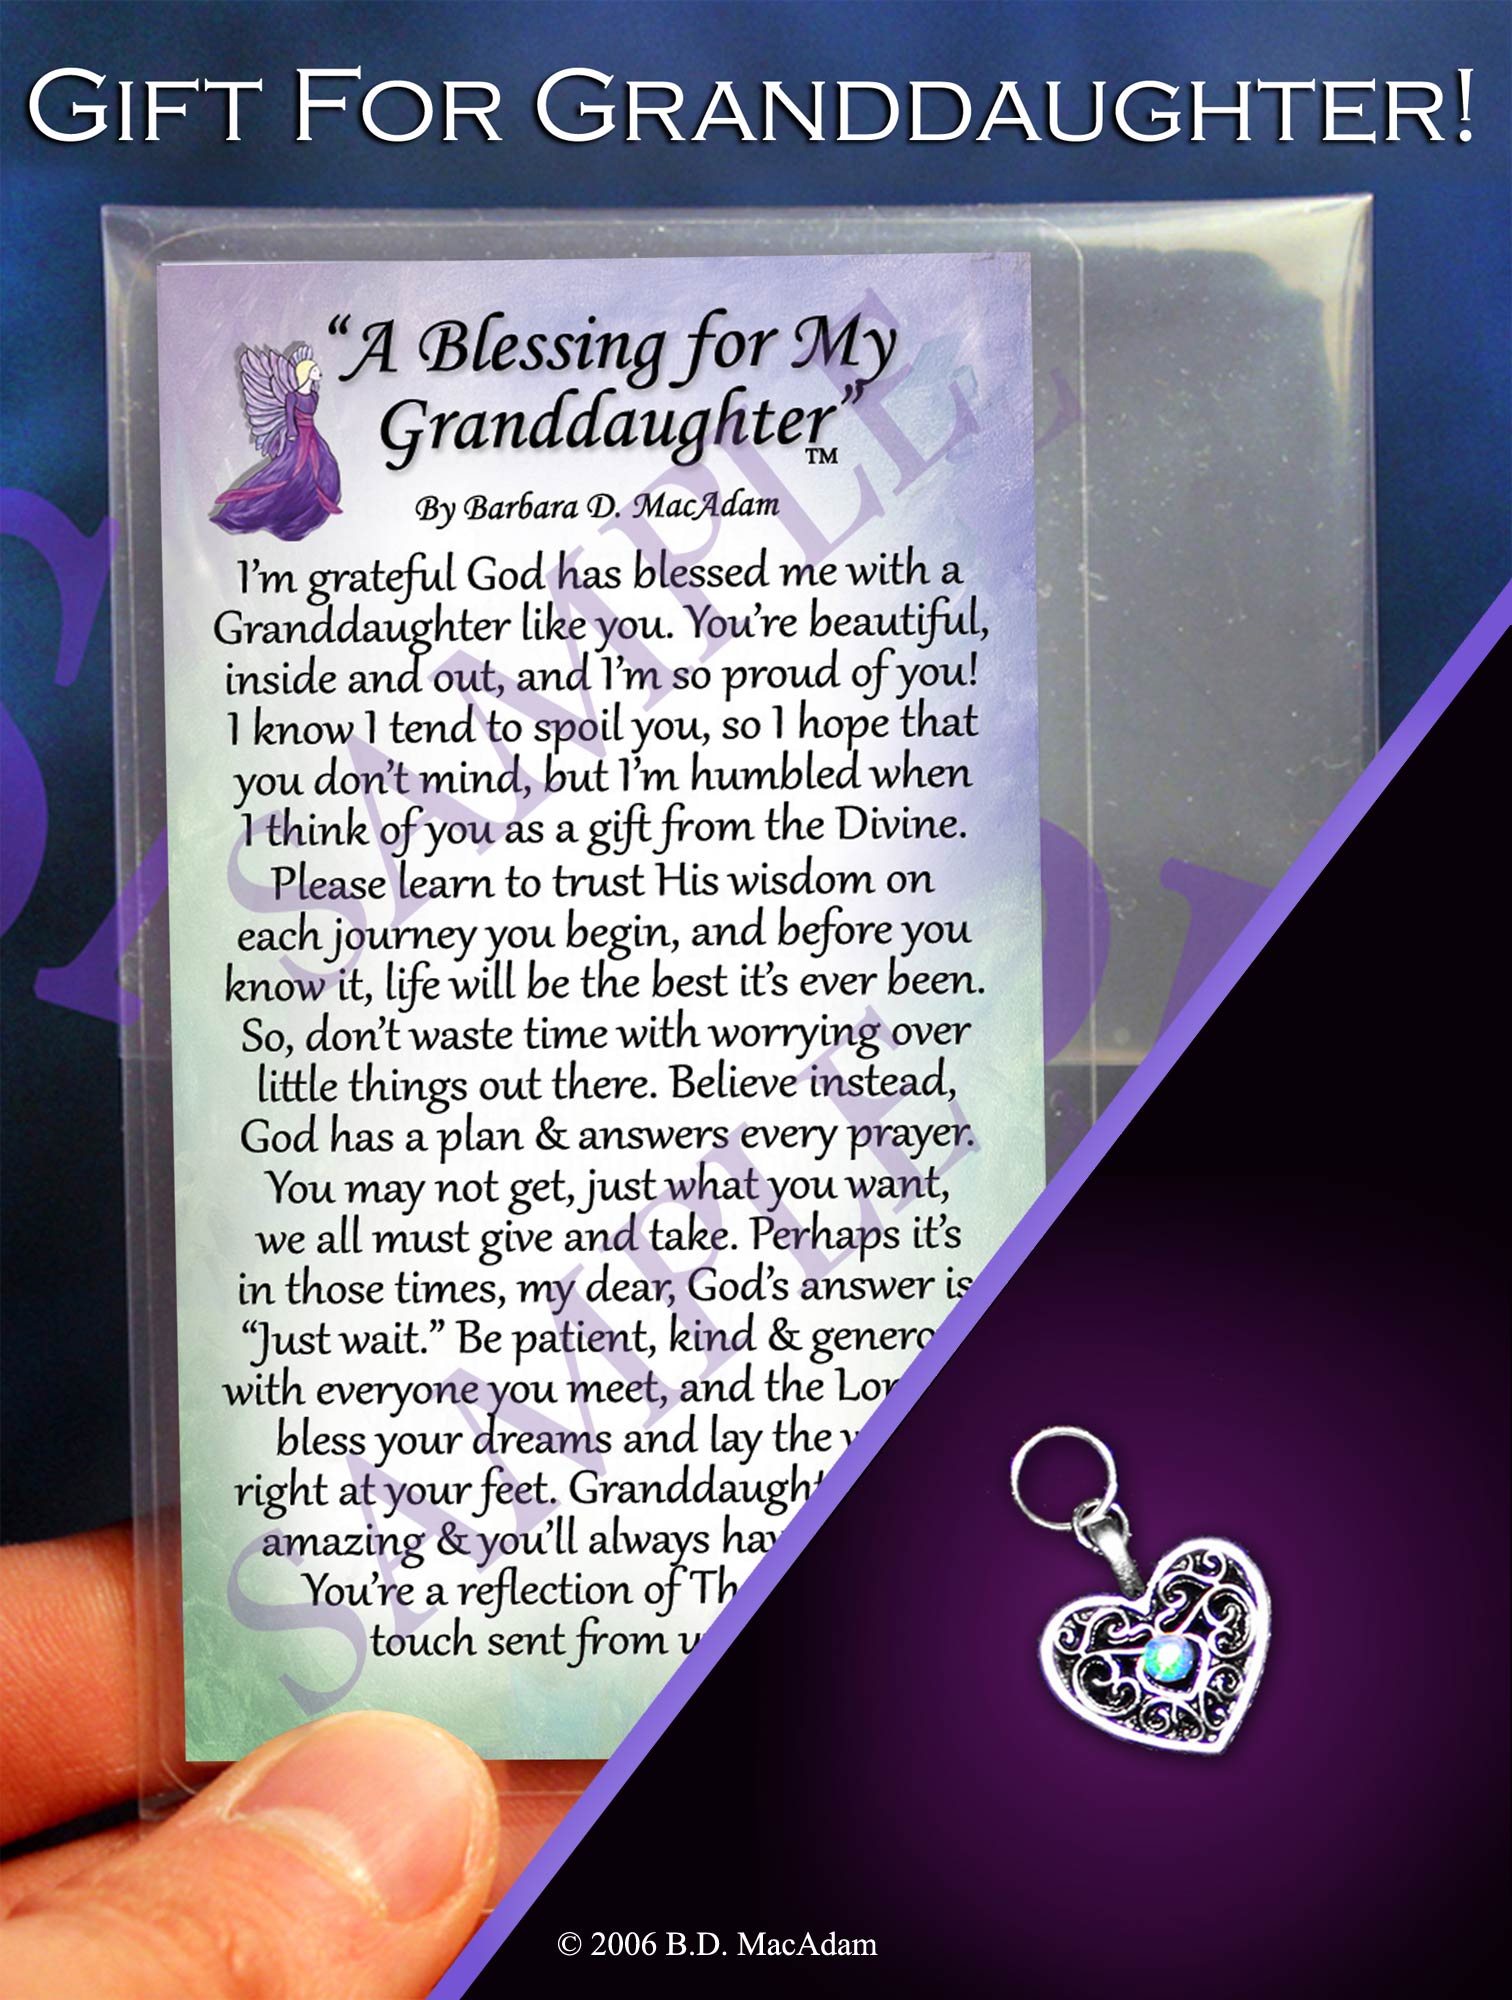 A Blessing for My Granddaughter - Pocket Blessing | PurpleWishingGate.com